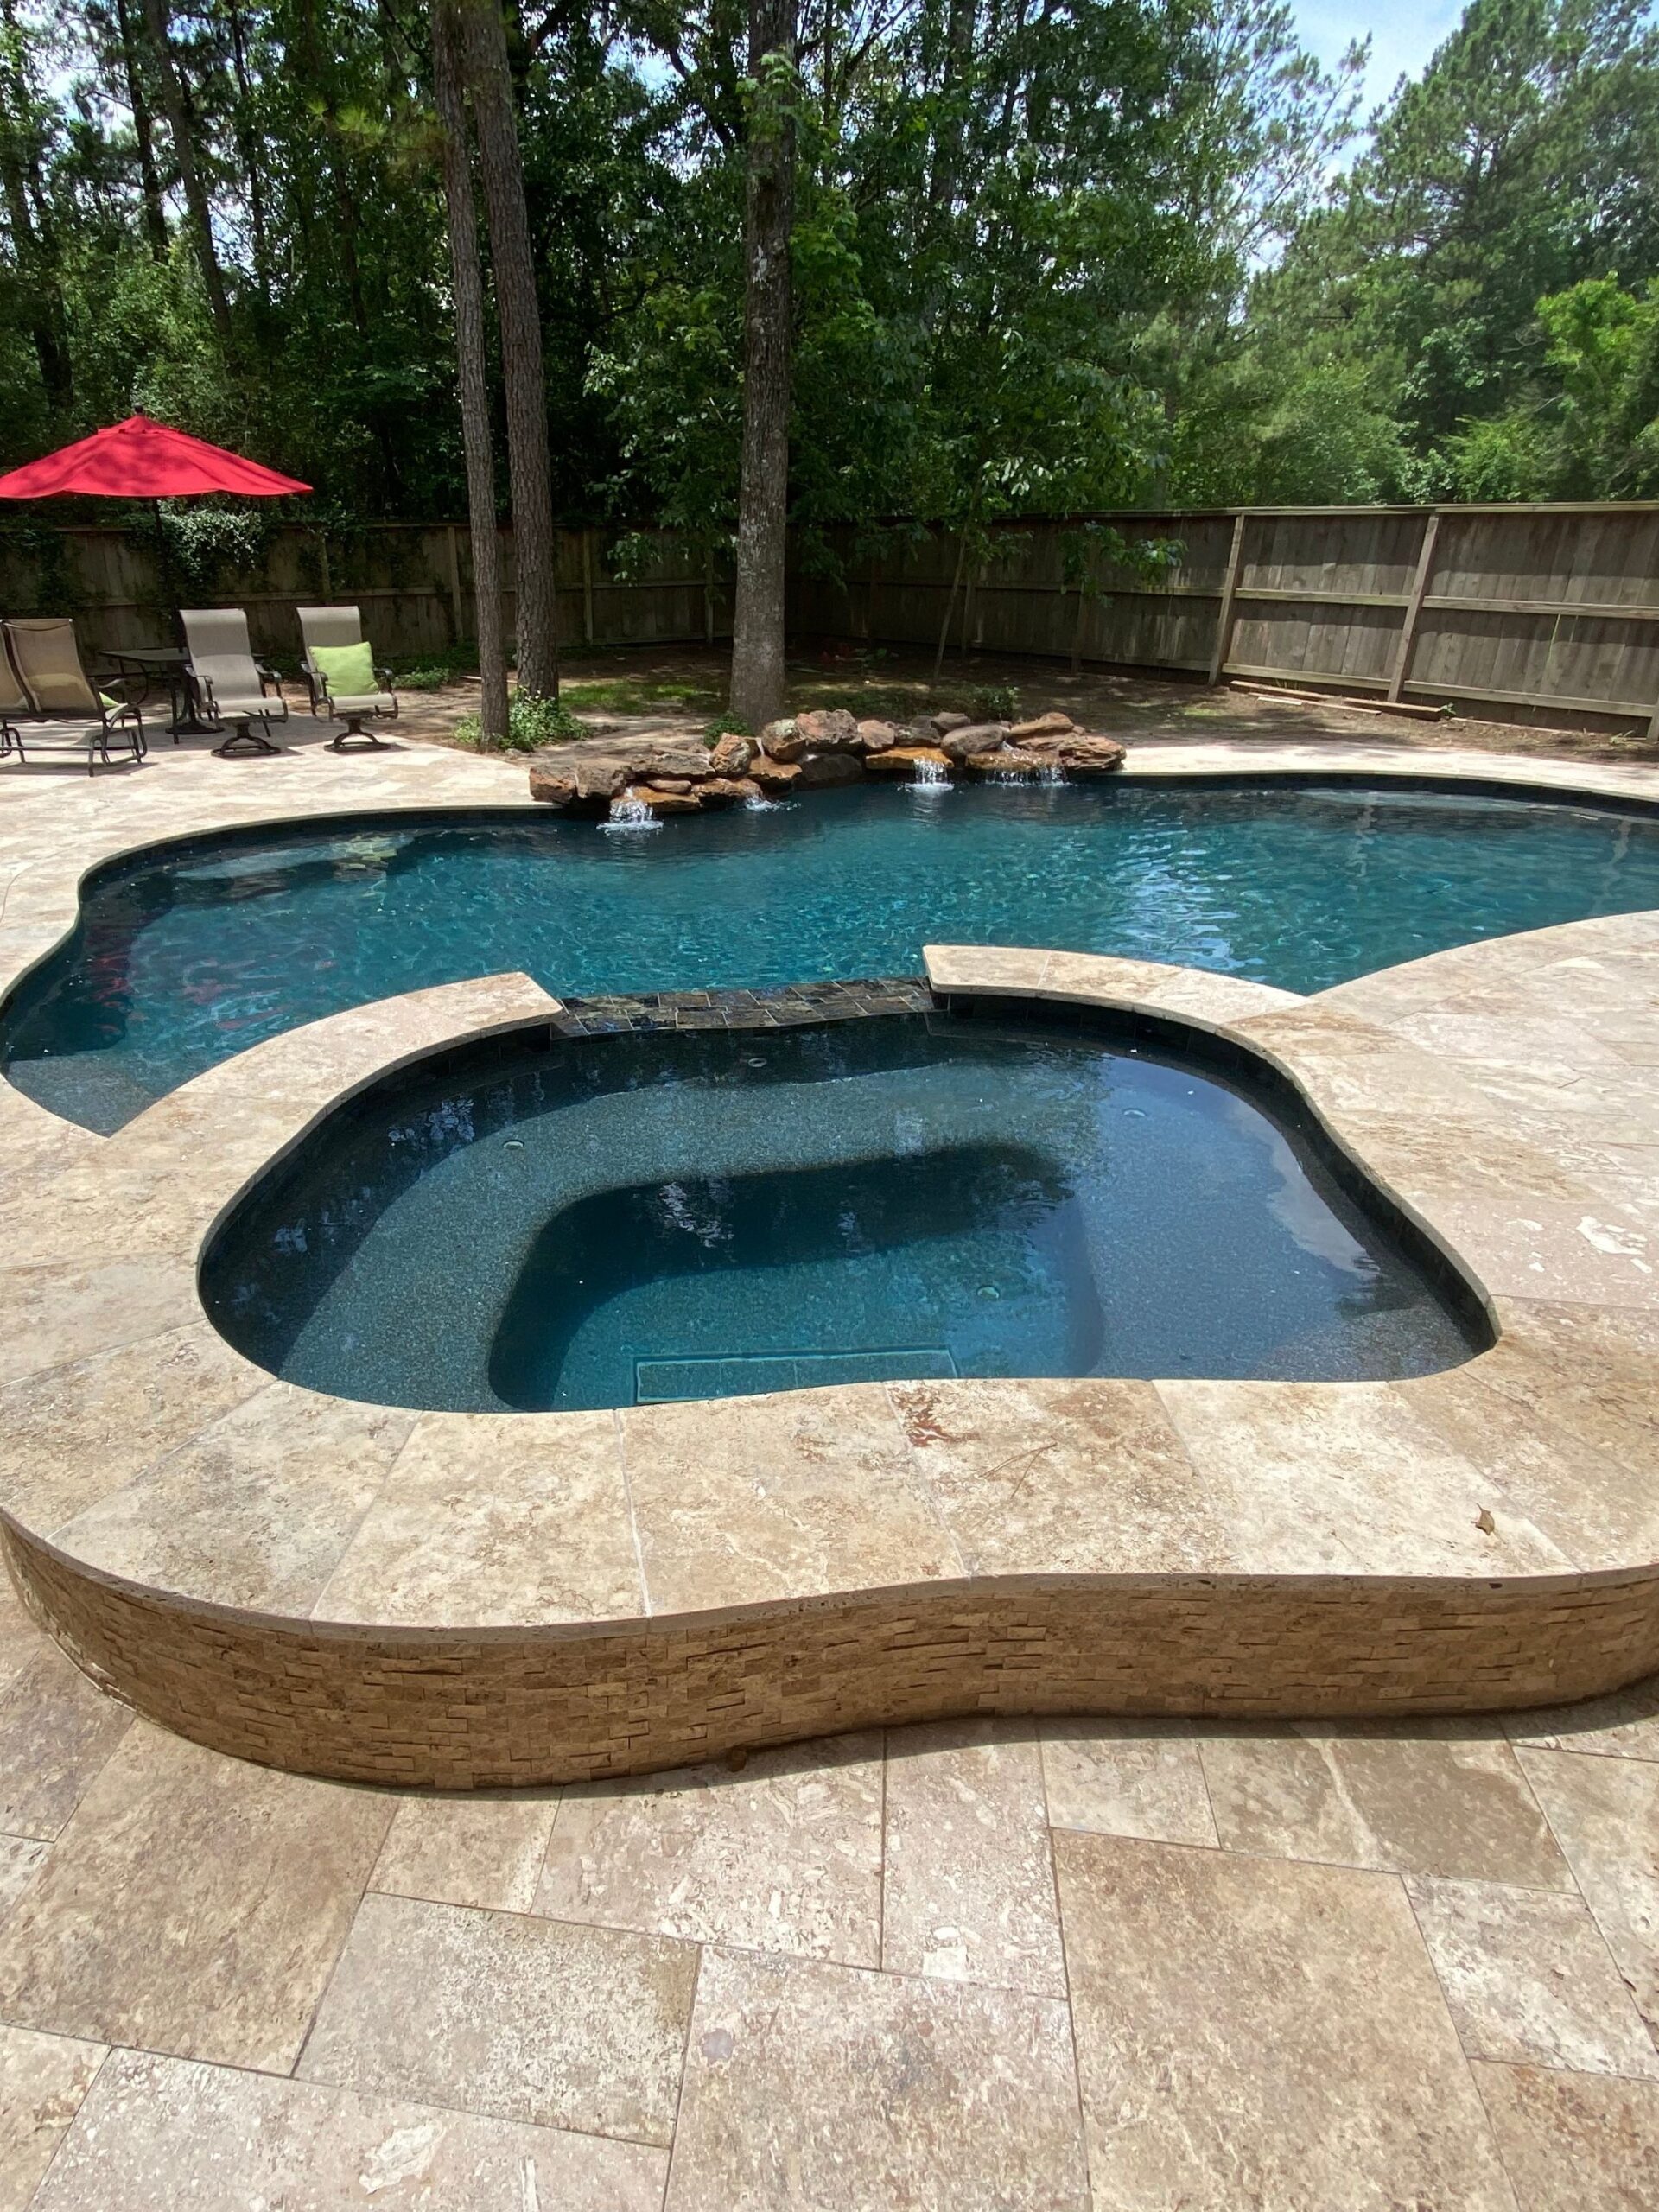 In-ground pool with attached spa and rock waterfall